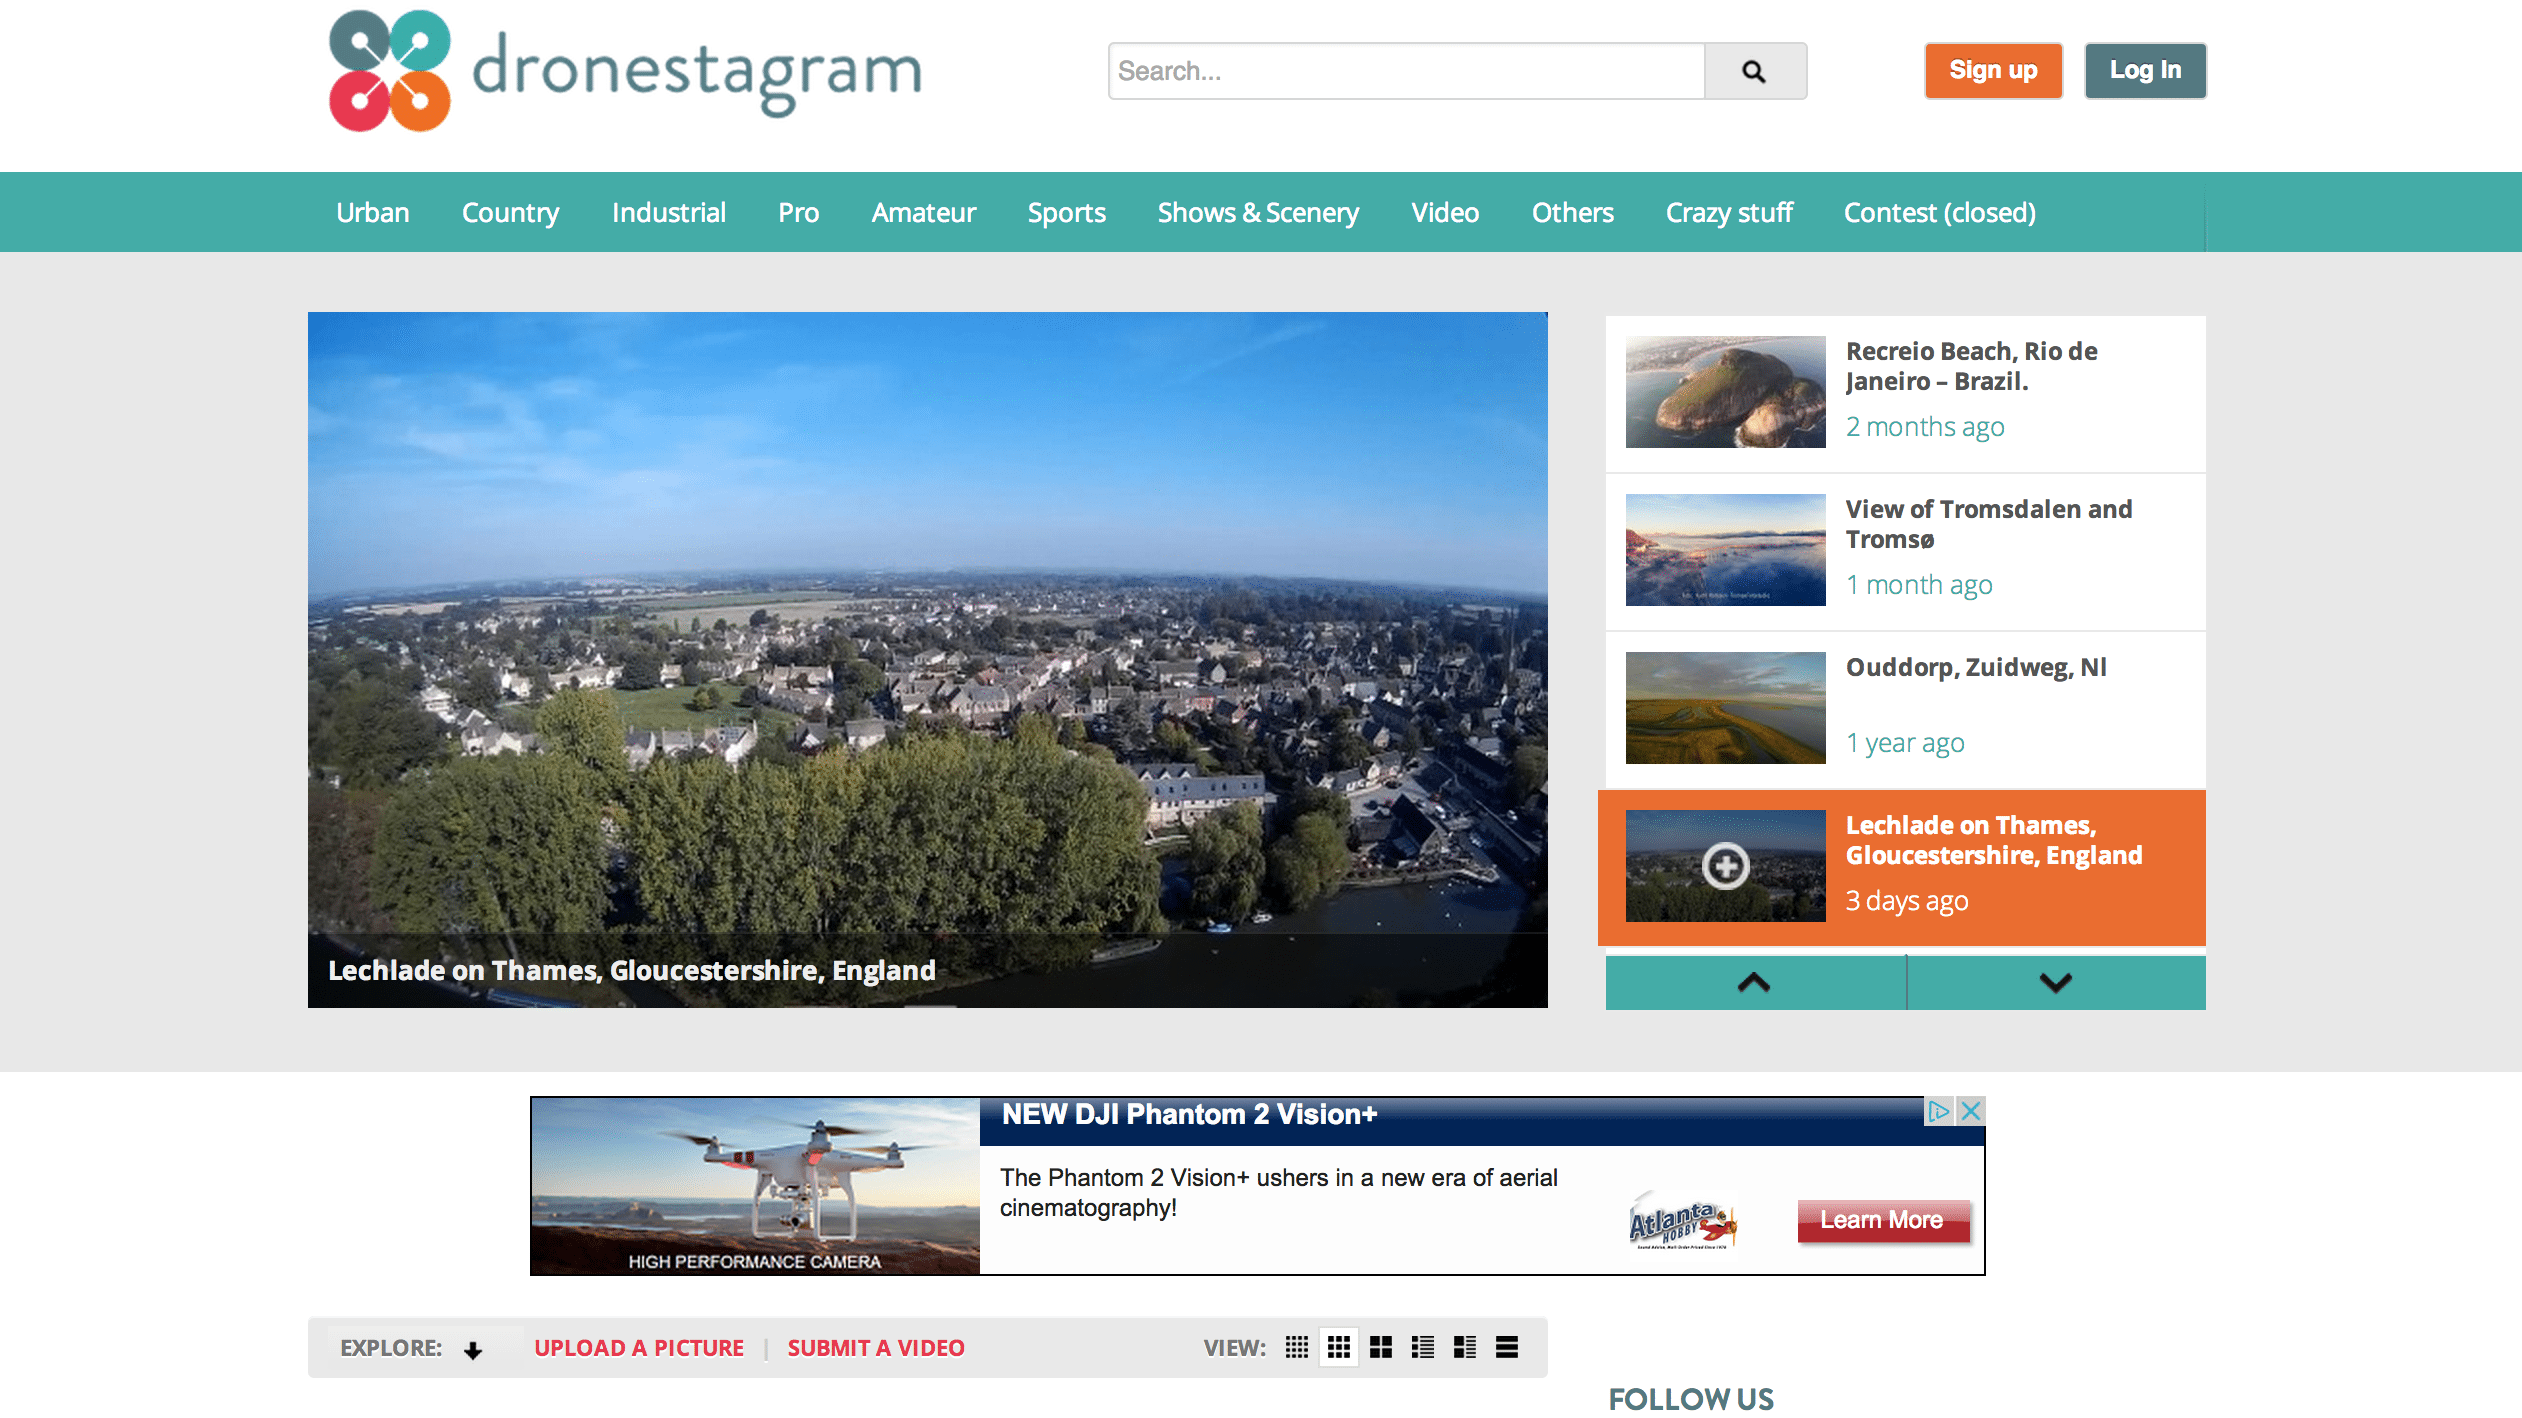 Dronestagram is a social network that lets drone users share their photos taken by drones.